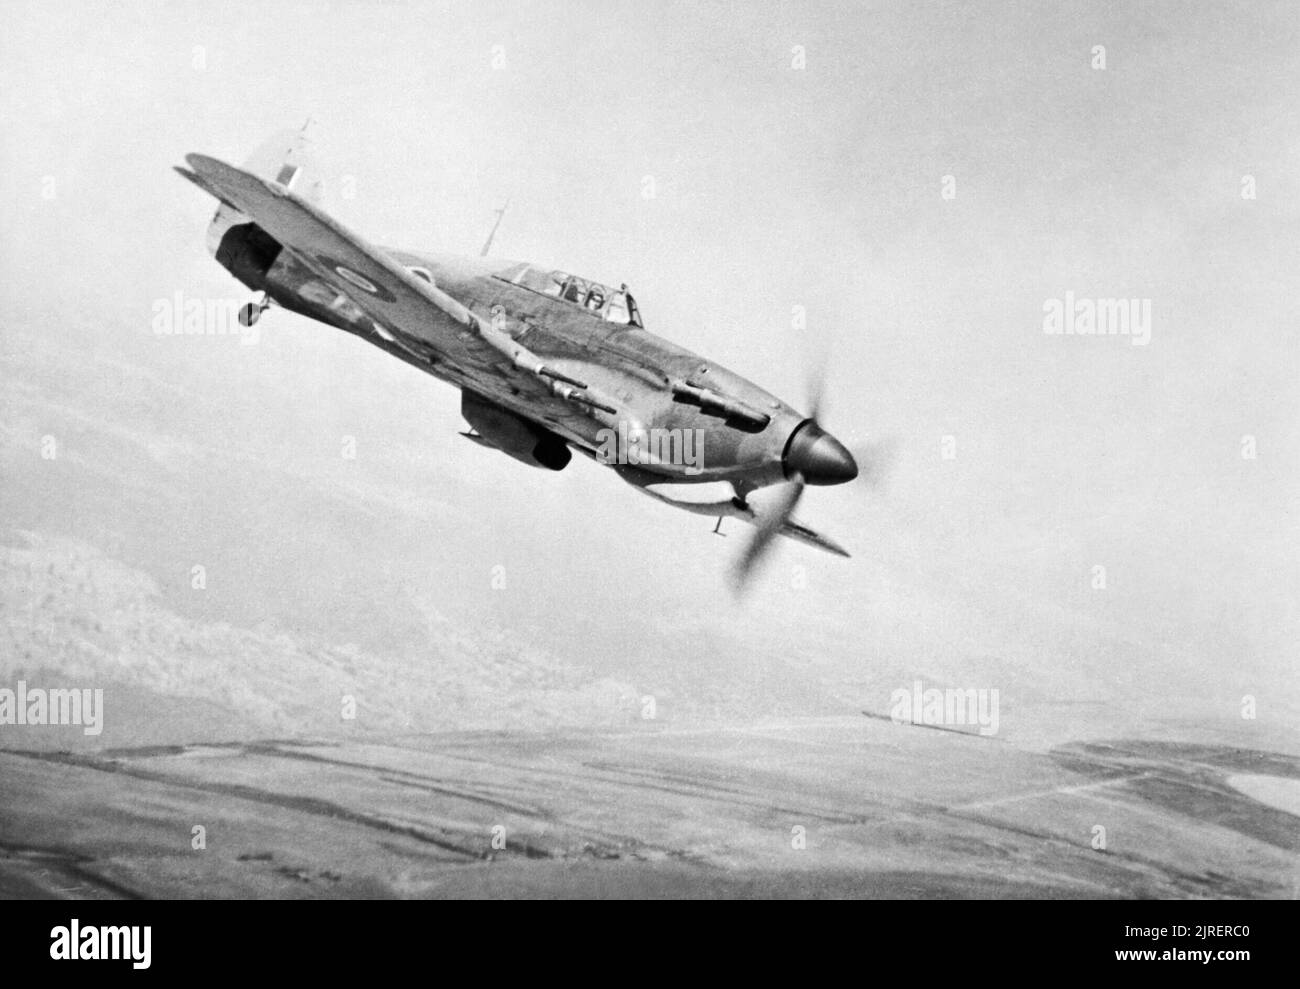 Hawker Hurricane Mk IIC of No. 166 Wing in flight from Chittagong in India, May 1943. A Hawker Hurricane Mark IIC of a squadron from No. 166 Wing RAF based at Chittagong, formates on the port quarter of the photographing aircraft. Stock Photo